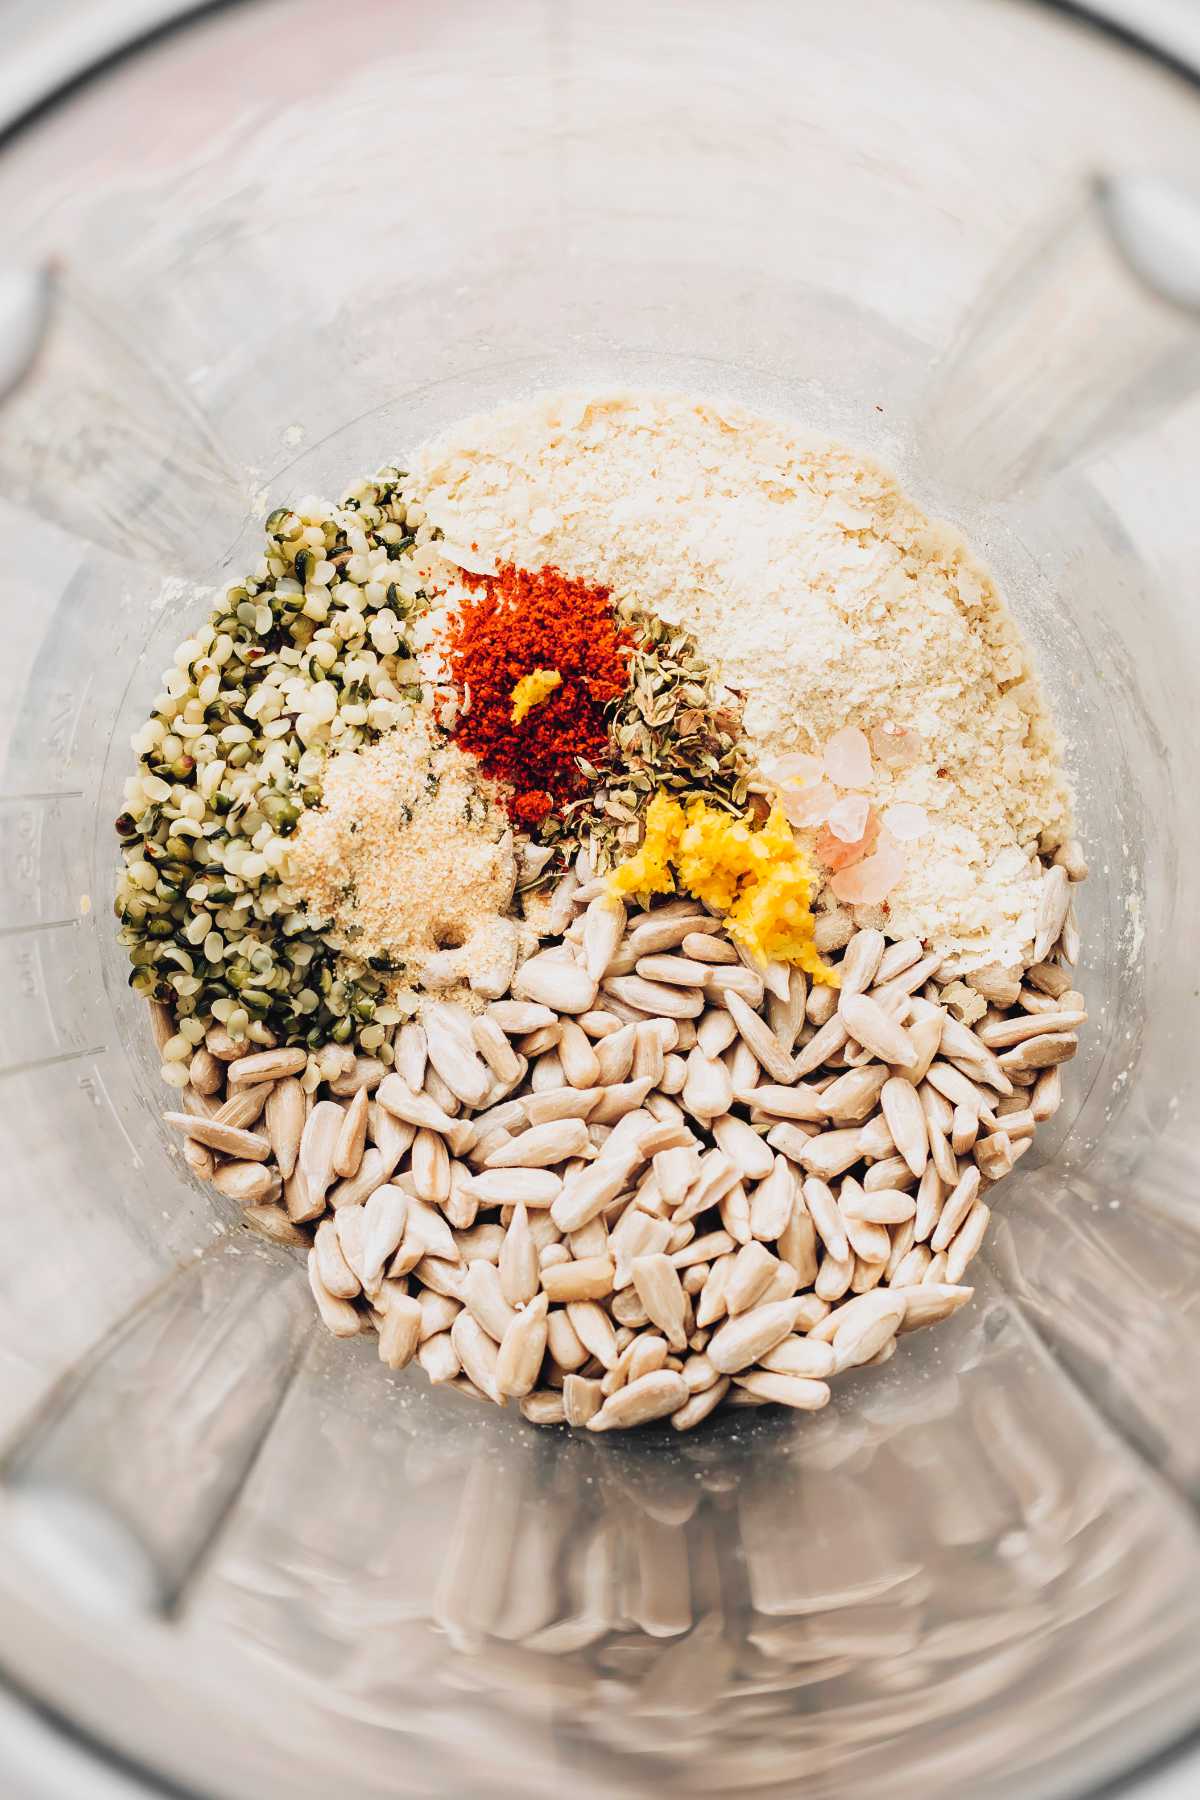 sunflower seeds and spices in a blender jar